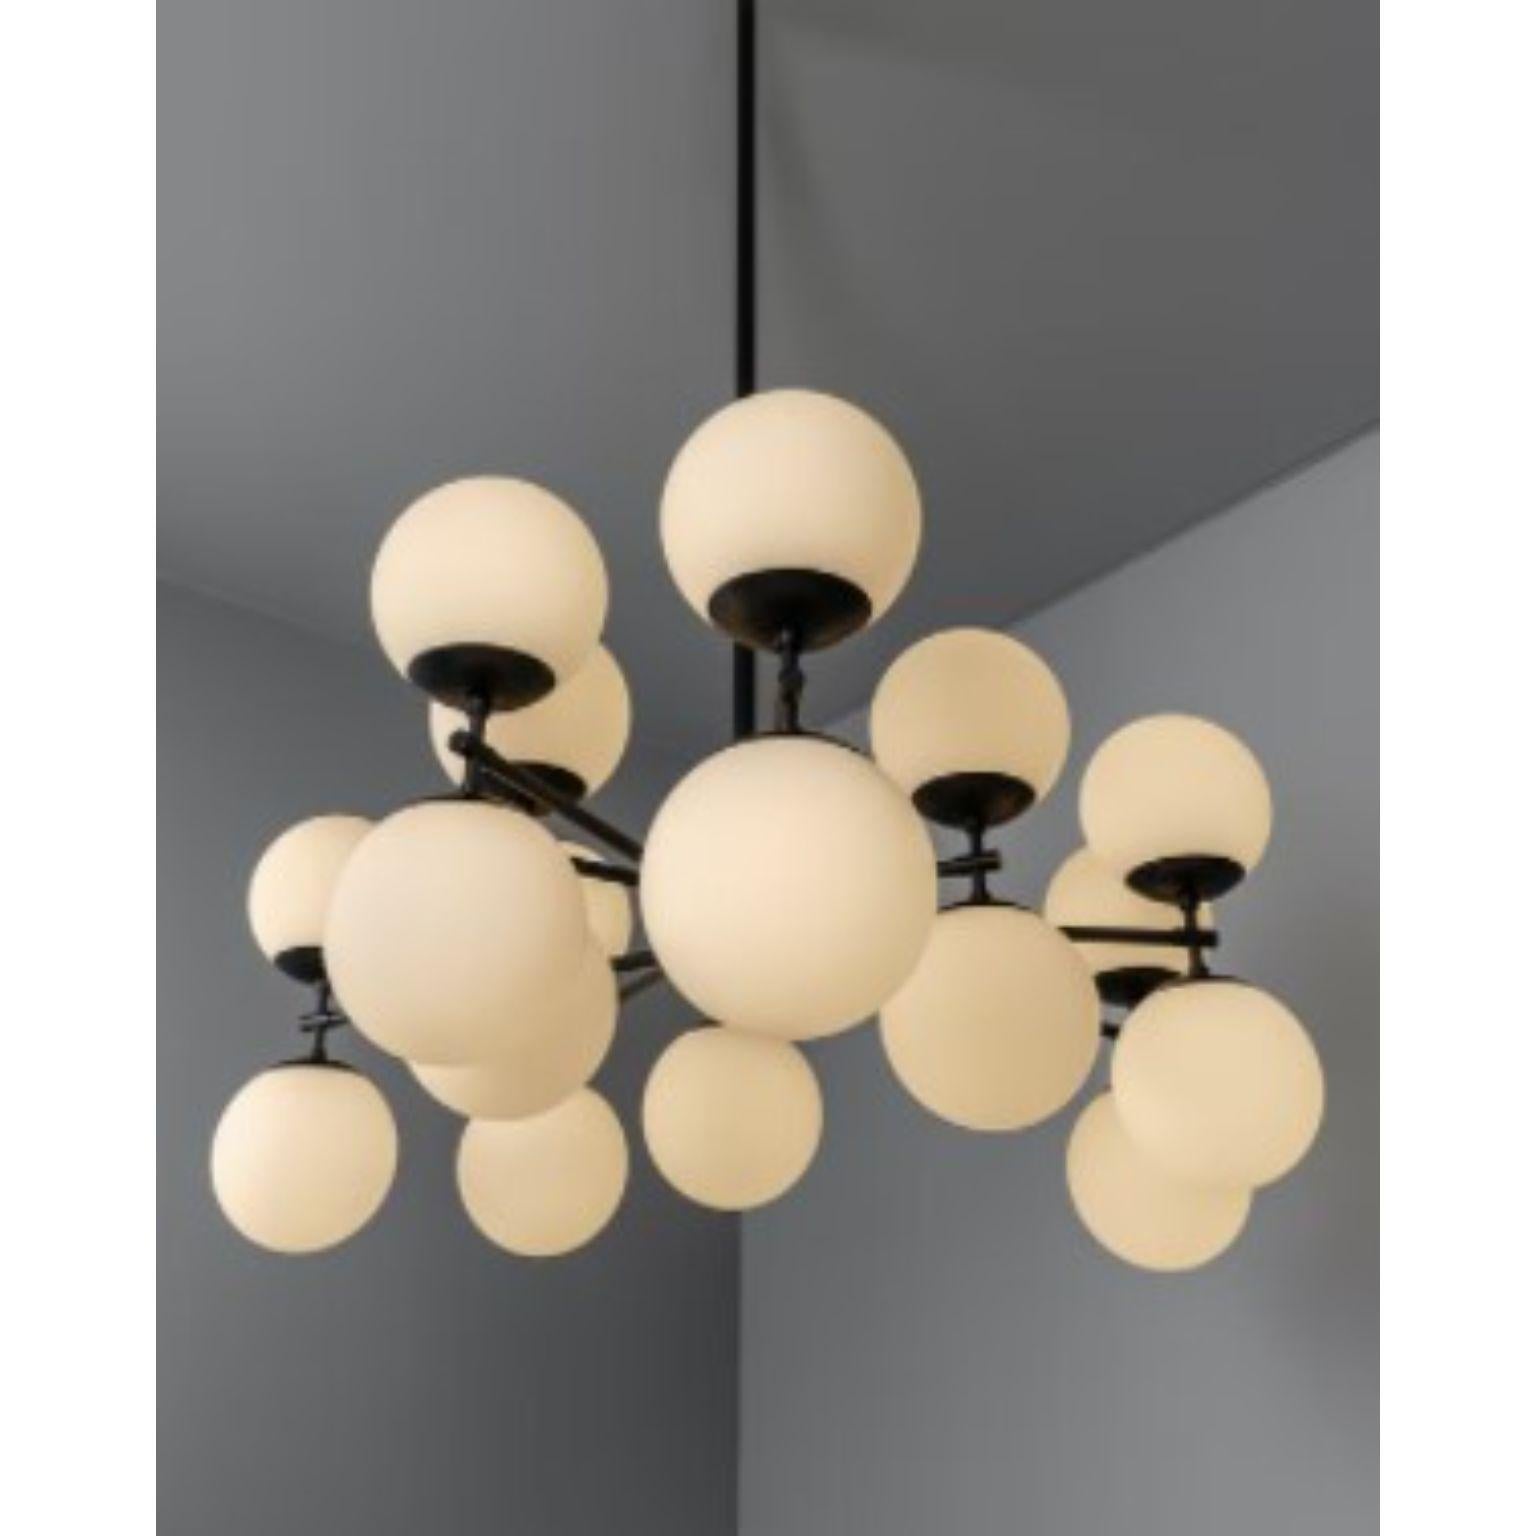 Zodiac chandelier by Schwung
Dimensions: D131.4 x H 152.4 cm
Materials: Brass, frosted glass

Finishes available: Black gunmetal, polished nickel, brass
Other sizes available.

 Schwung is a german word, and loosely defined, means energy or